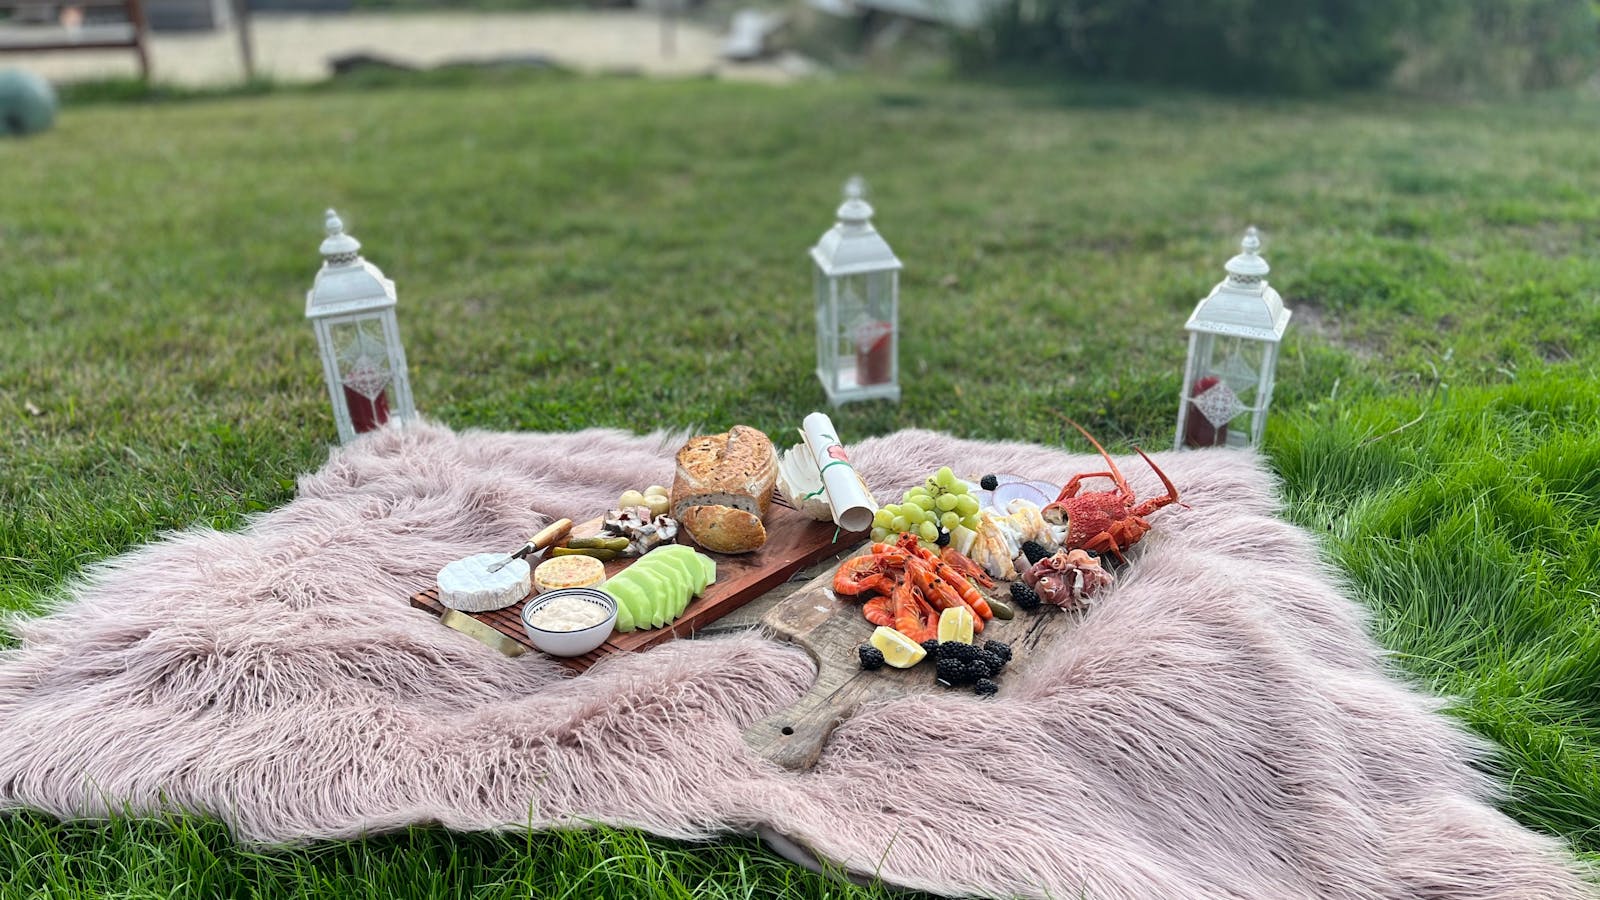 Picnic on our ground